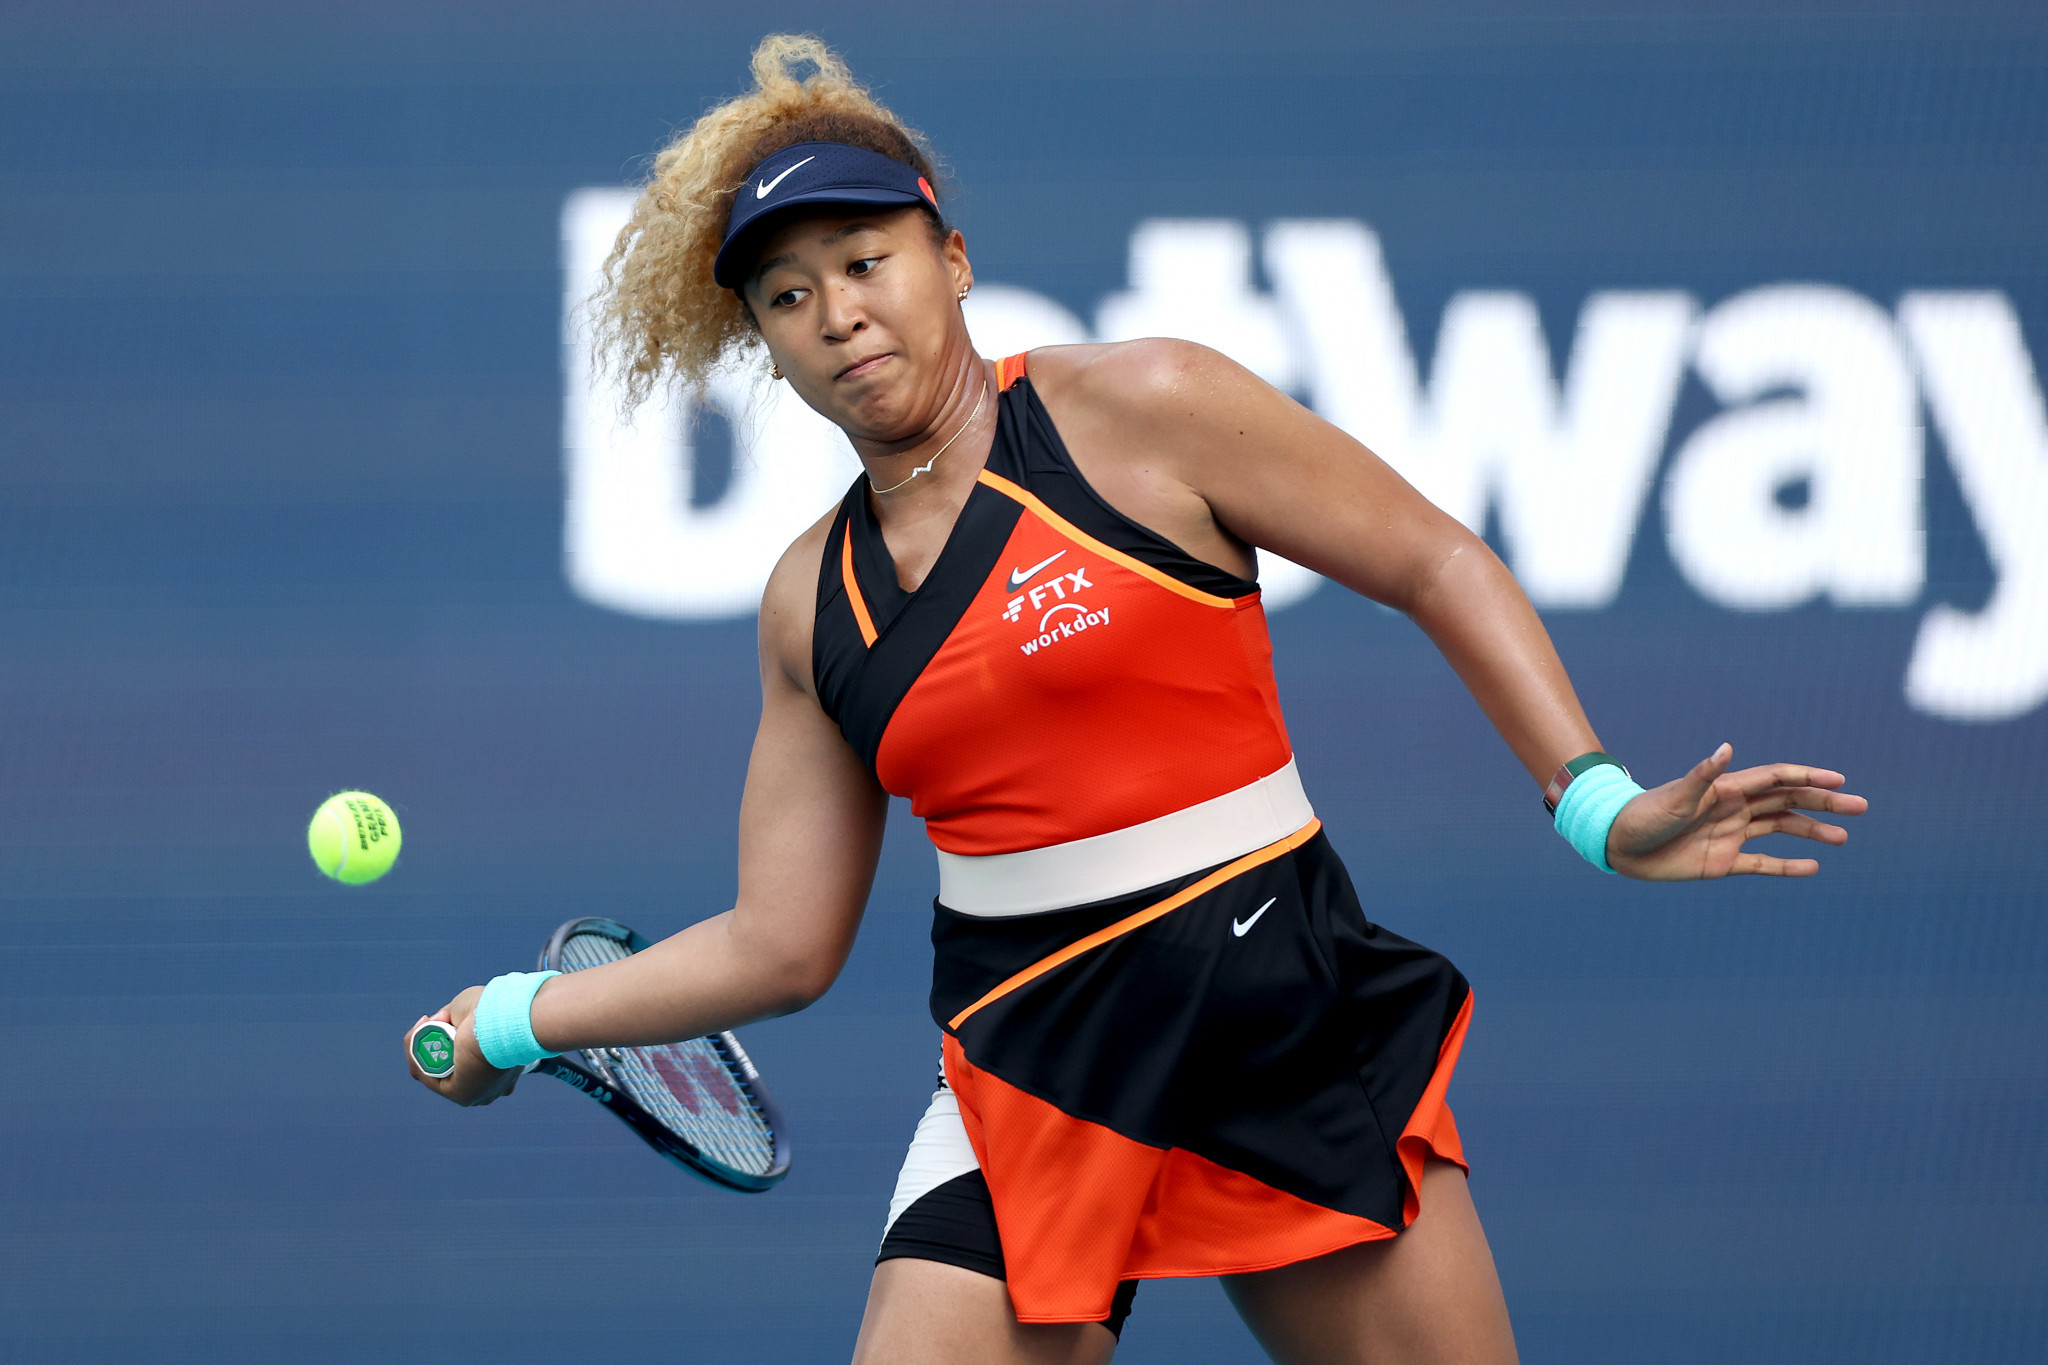 Japan's Naomi Osaka reached her first WTA Tour final since last year's Australian Open with victory over Switzerland's Olympic champion Belinda Bencic ©Getty Images